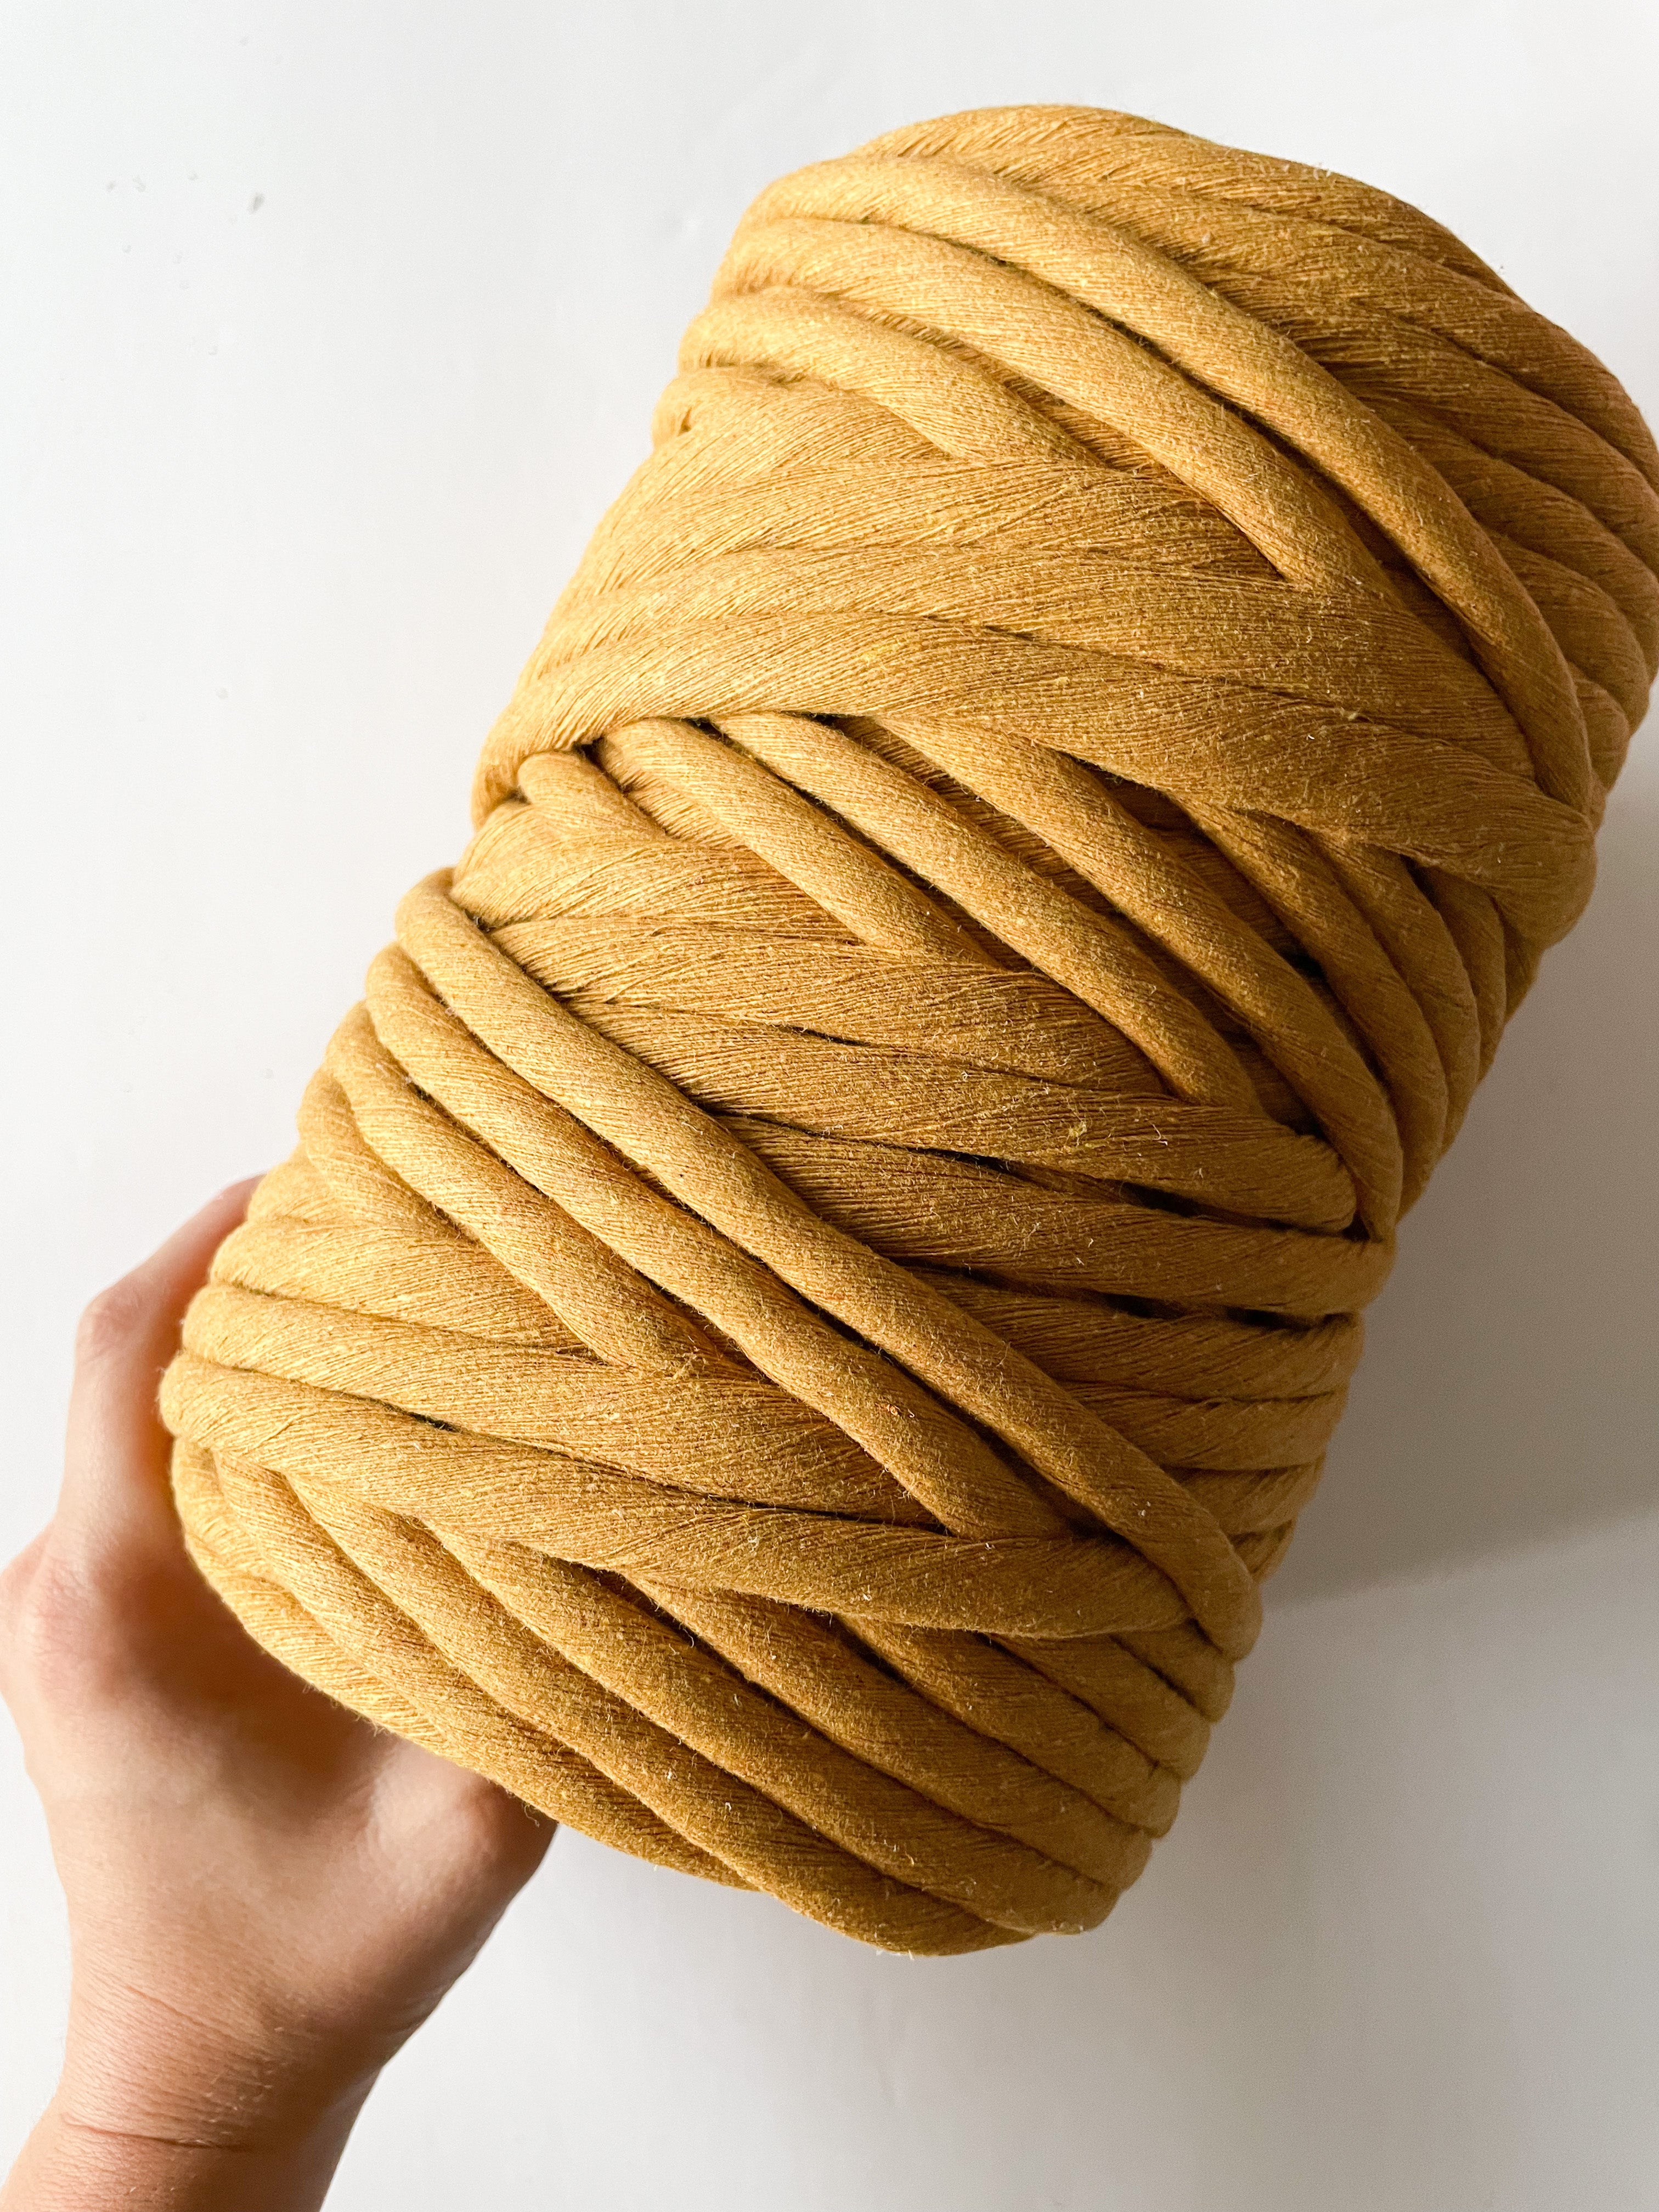 Natural ultra soft single rope roll